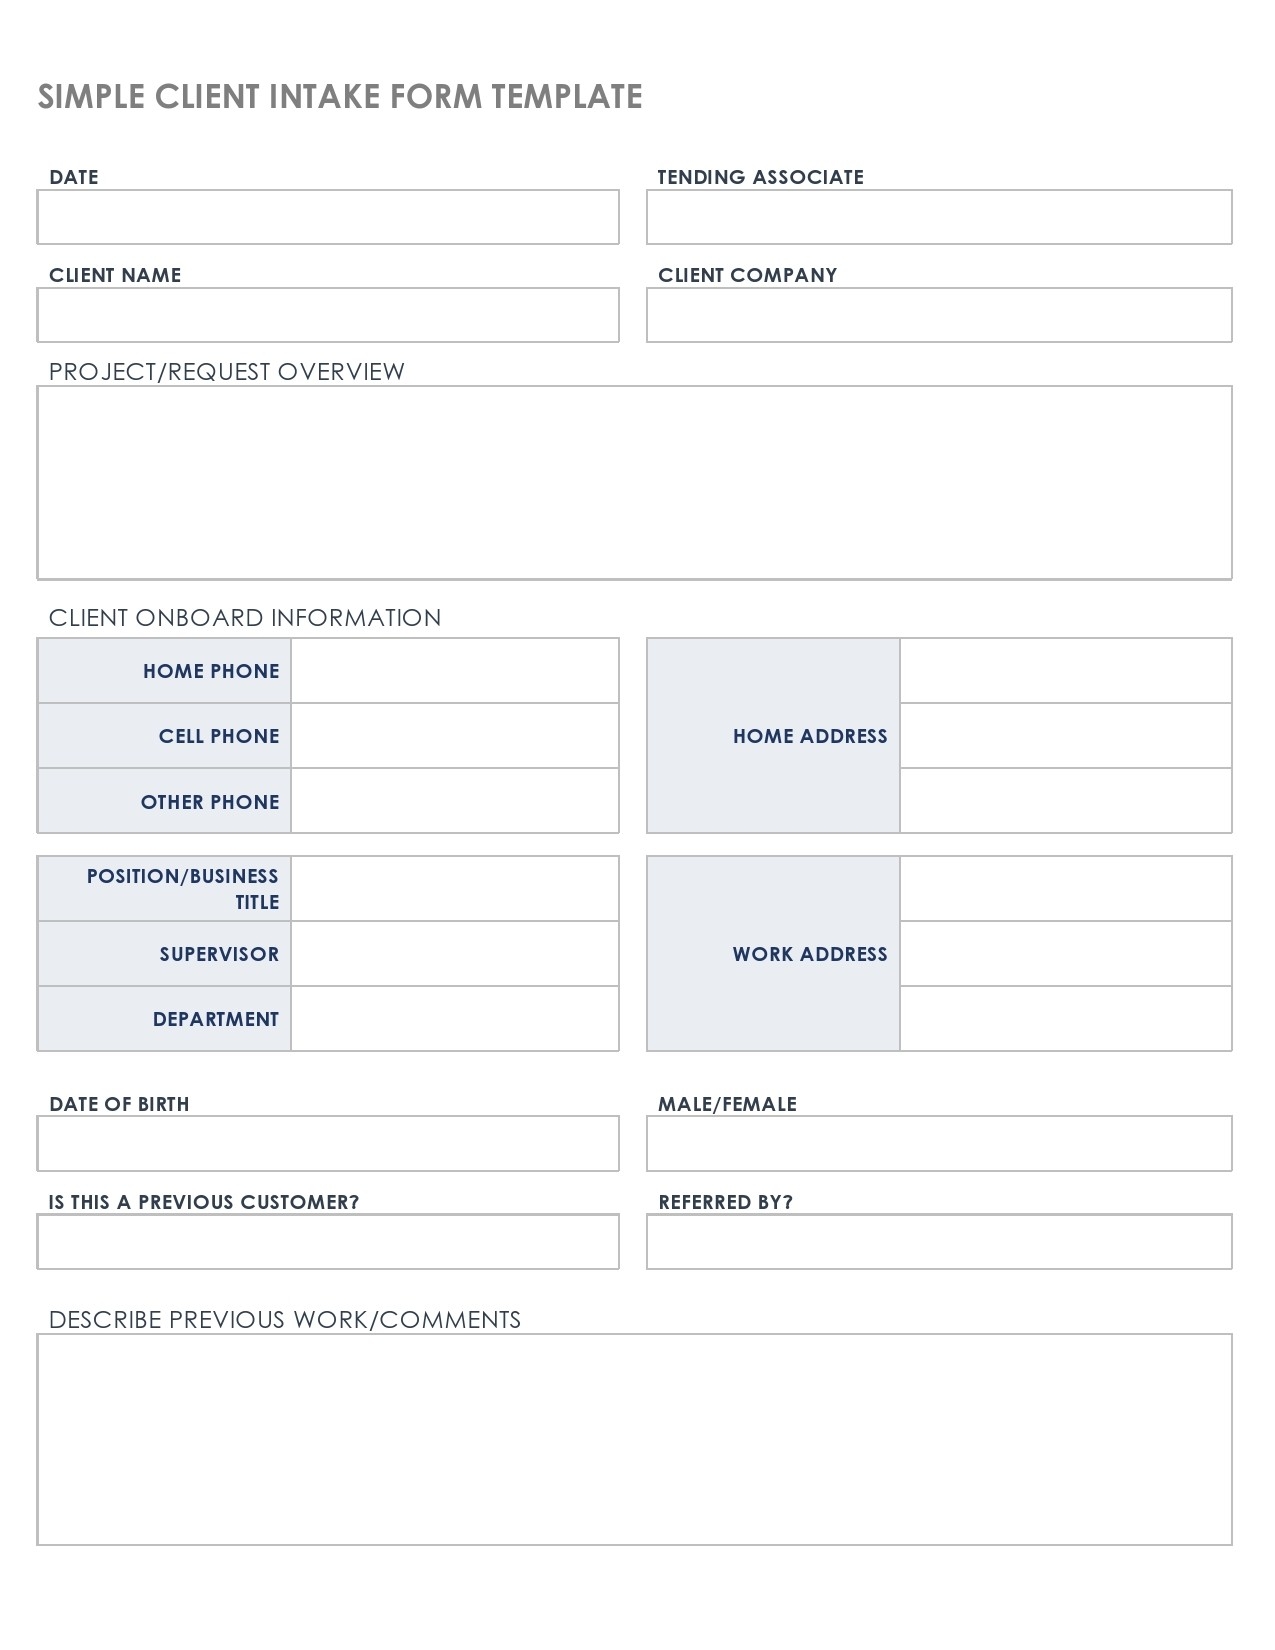 42 Printable Client Intake Forms FREE Templates TemplateLab - Find Free Printable Forms Online